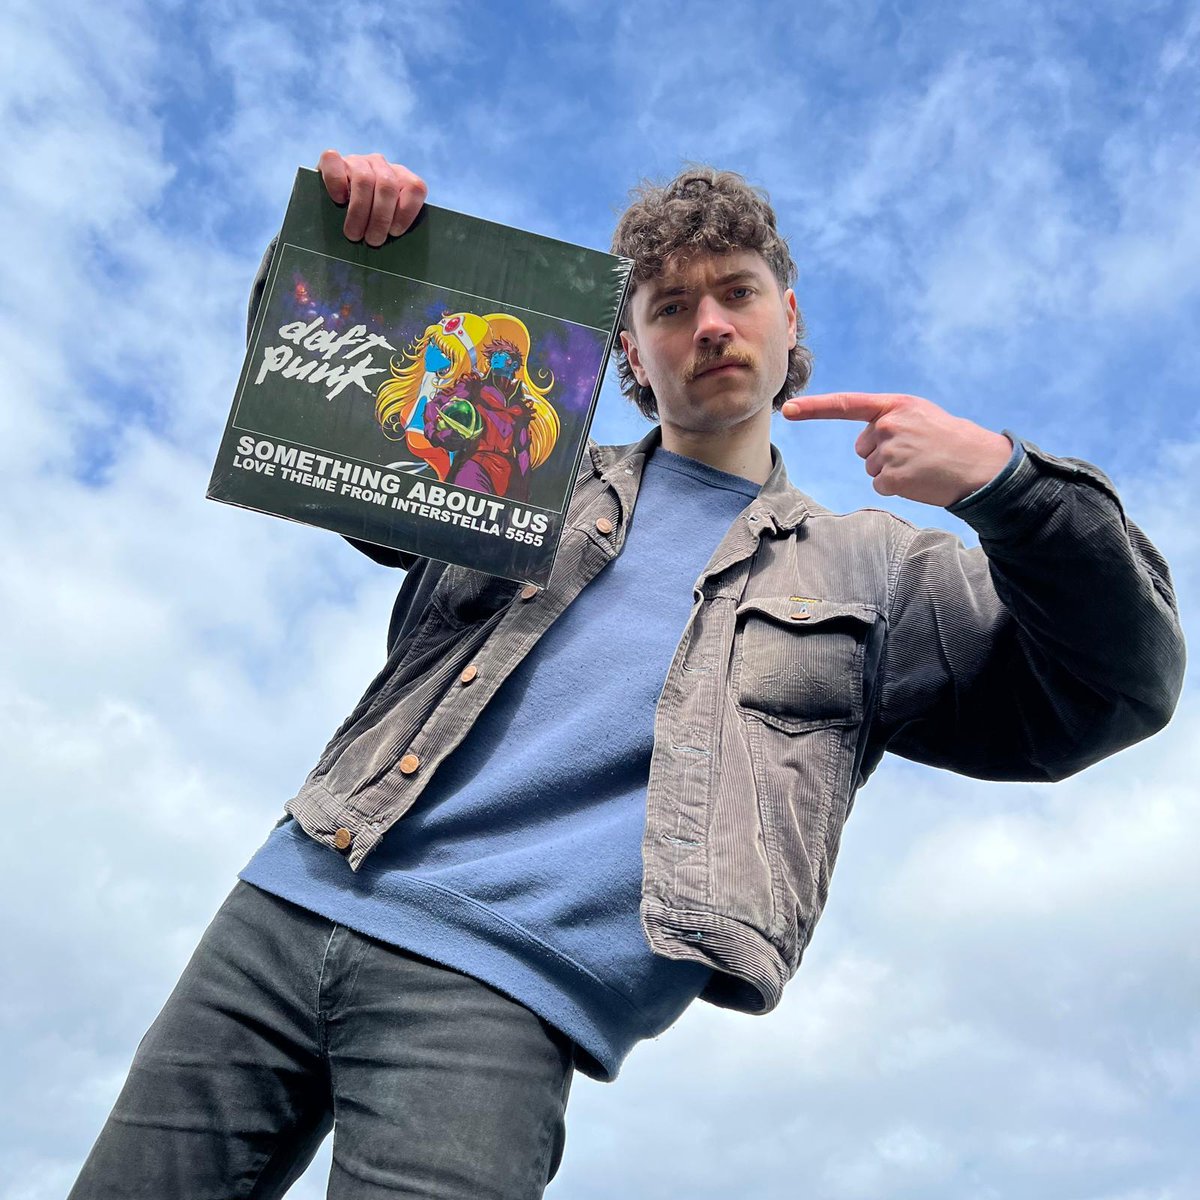 ***RECORD STORE DAY 2024*** Pics in the Park of our Picks - Part 1 ONLY 2 BLOODY DAYS TO RSD!!! Mark: @KatyJPearsonnn 'The Wicker Man EP' Jake: @daftpunk 'Something About Us' 8am - 8pm Saturday 20th Records & beer Rosie H Sullivan LIVE at 11:30am & 3:30pm